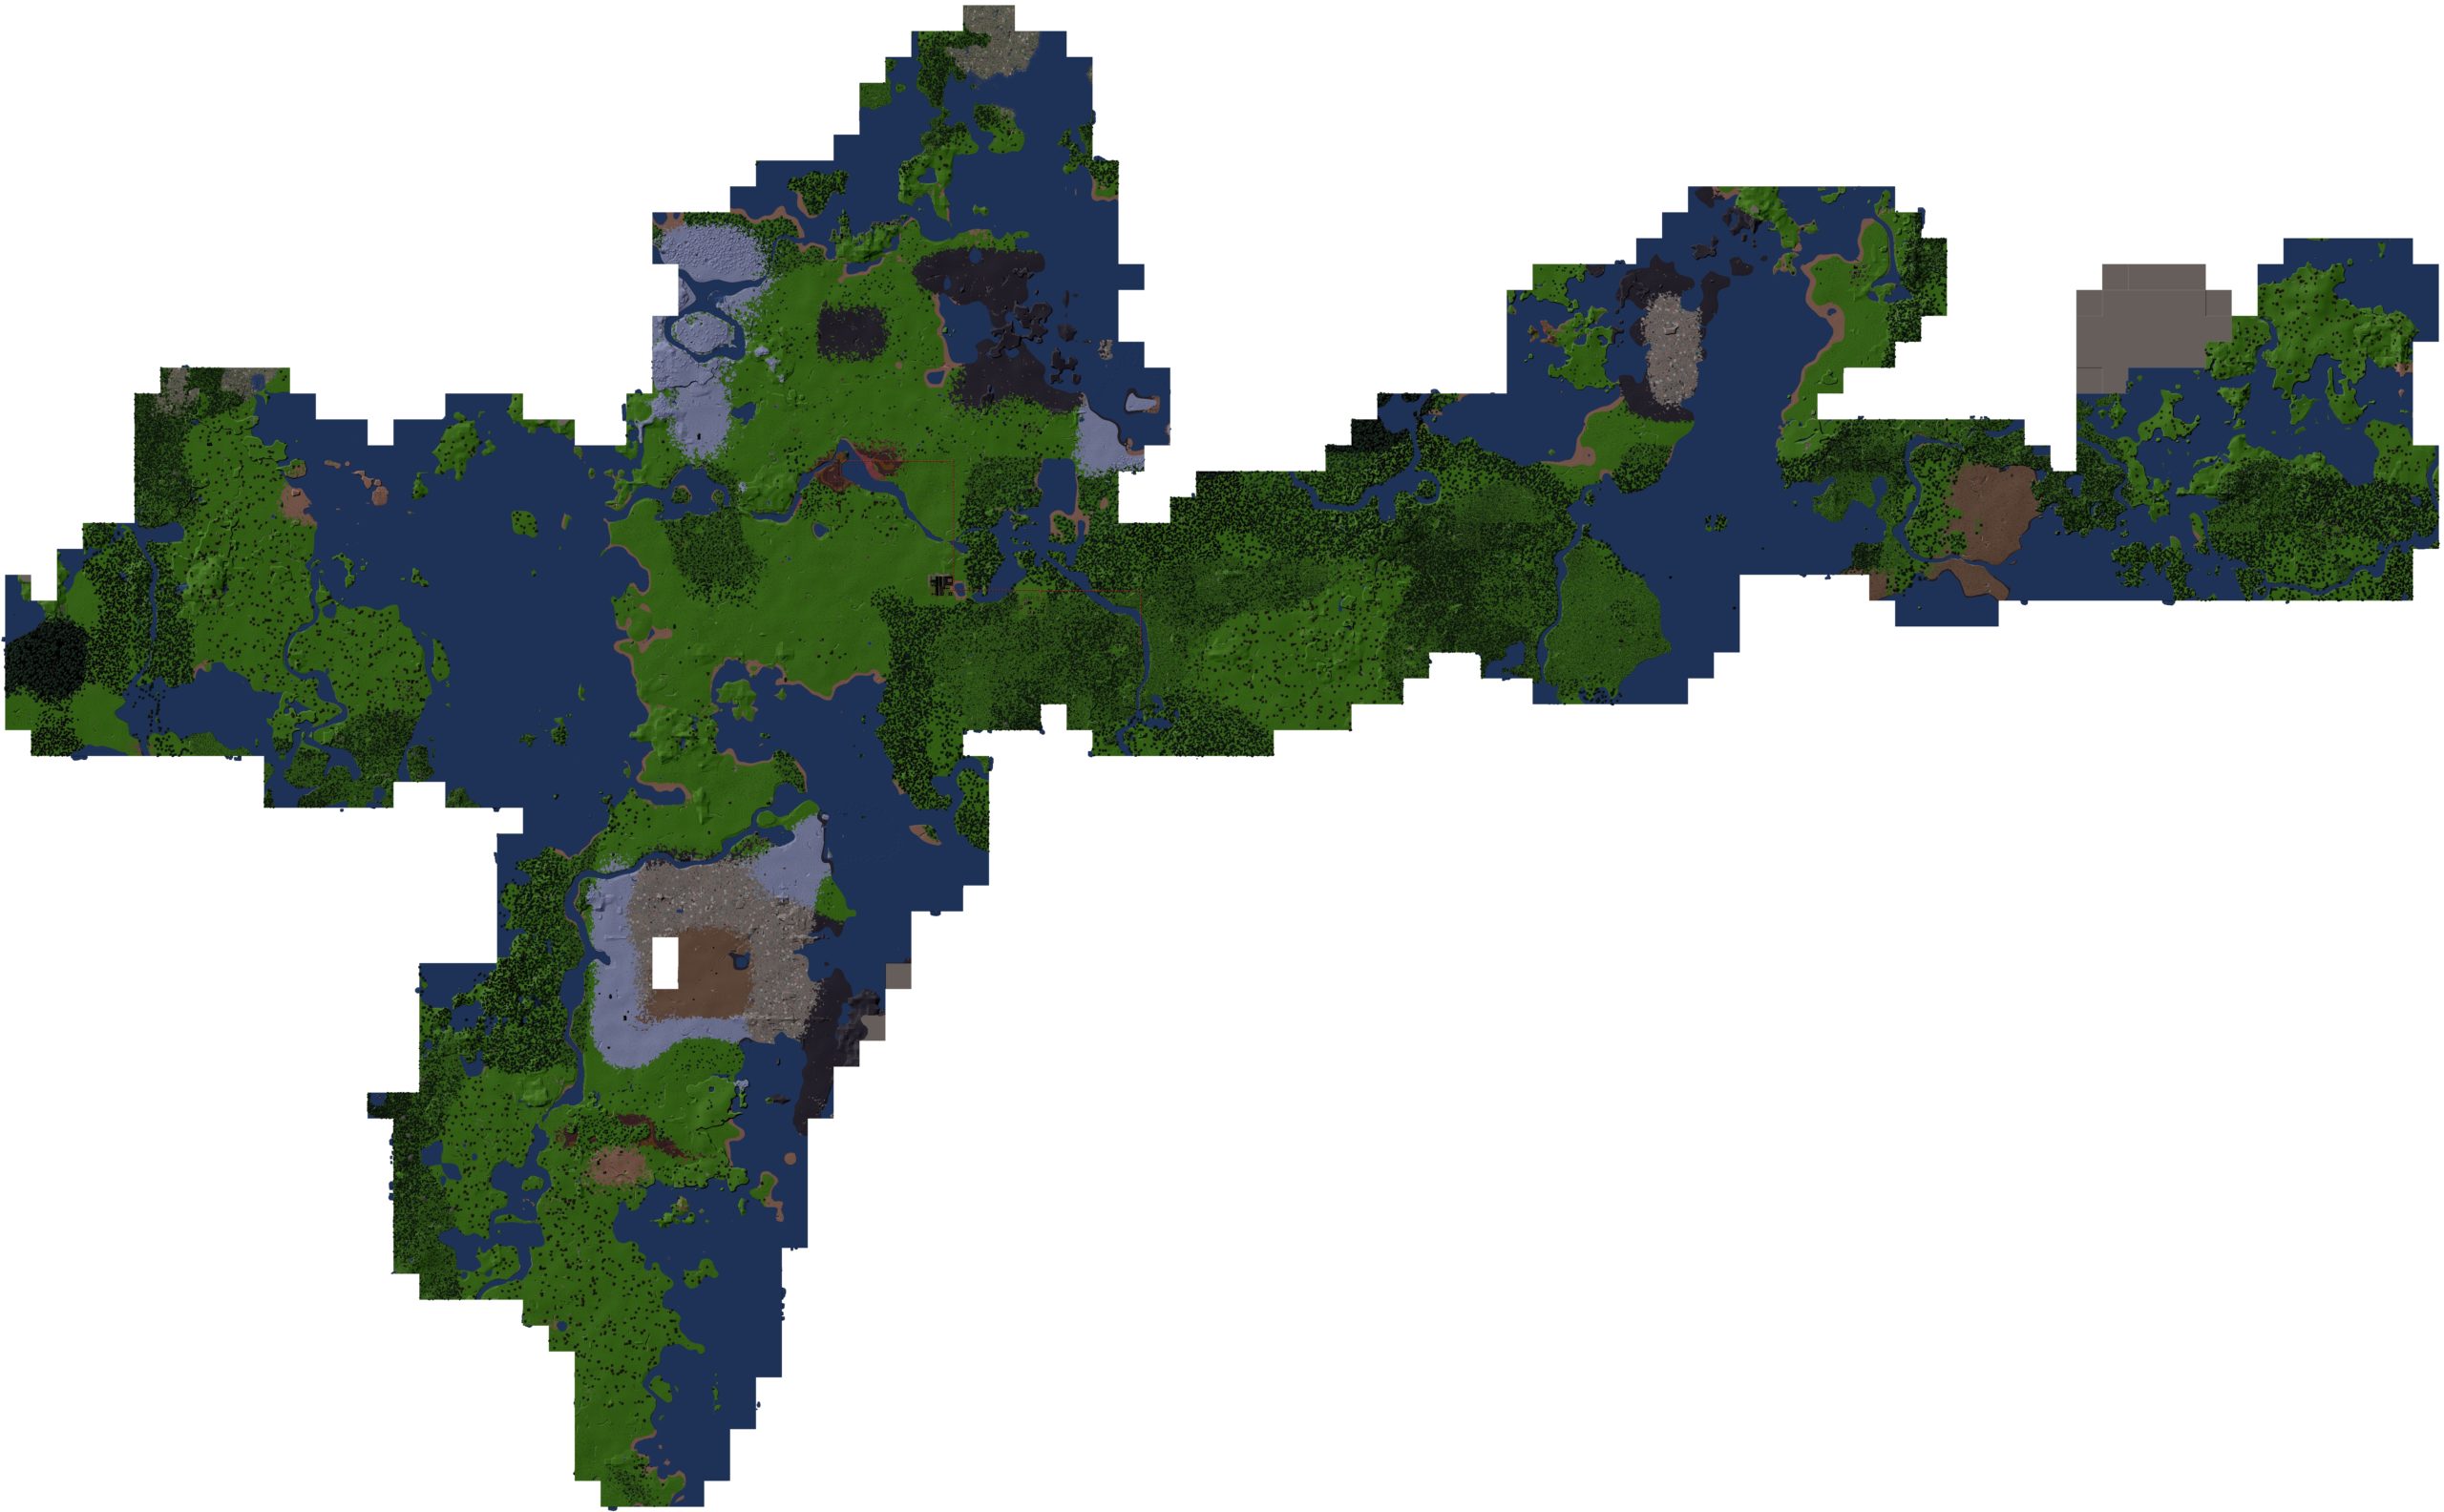 REDACTED] - Maps - Mapping and Modding: Java Edition - Minecraft